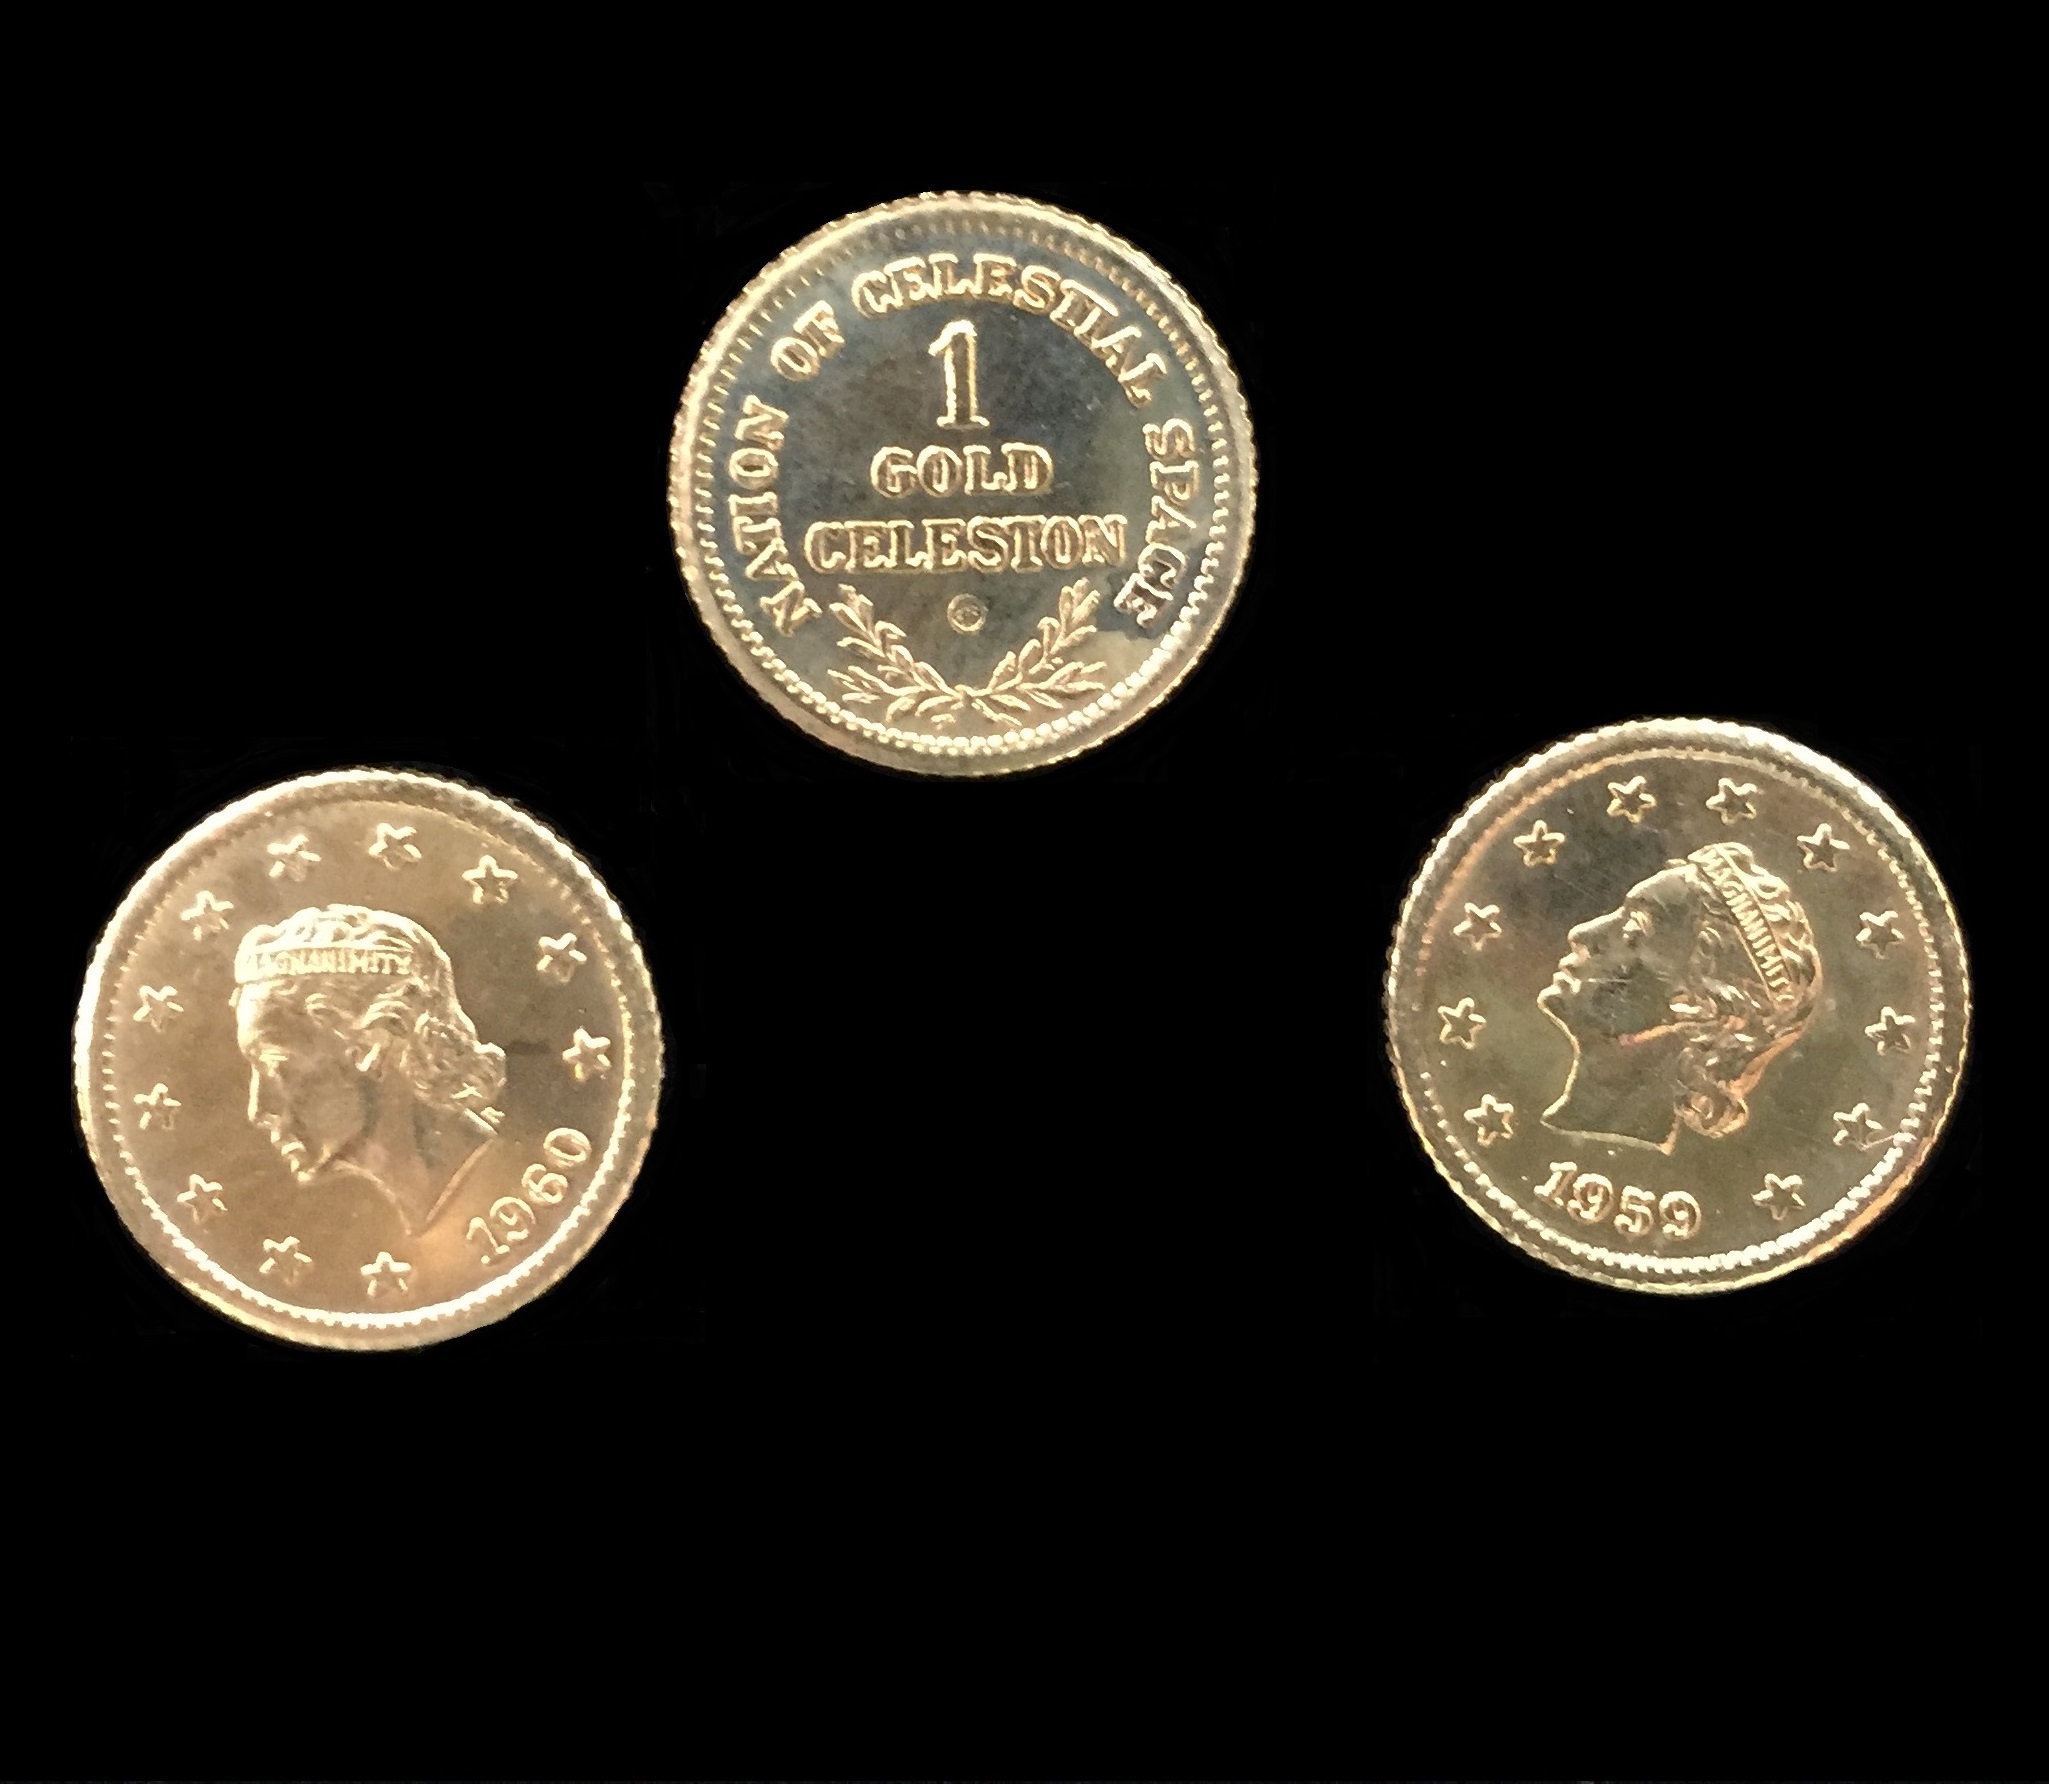 Coins: They're outta this world | National Museum of American History